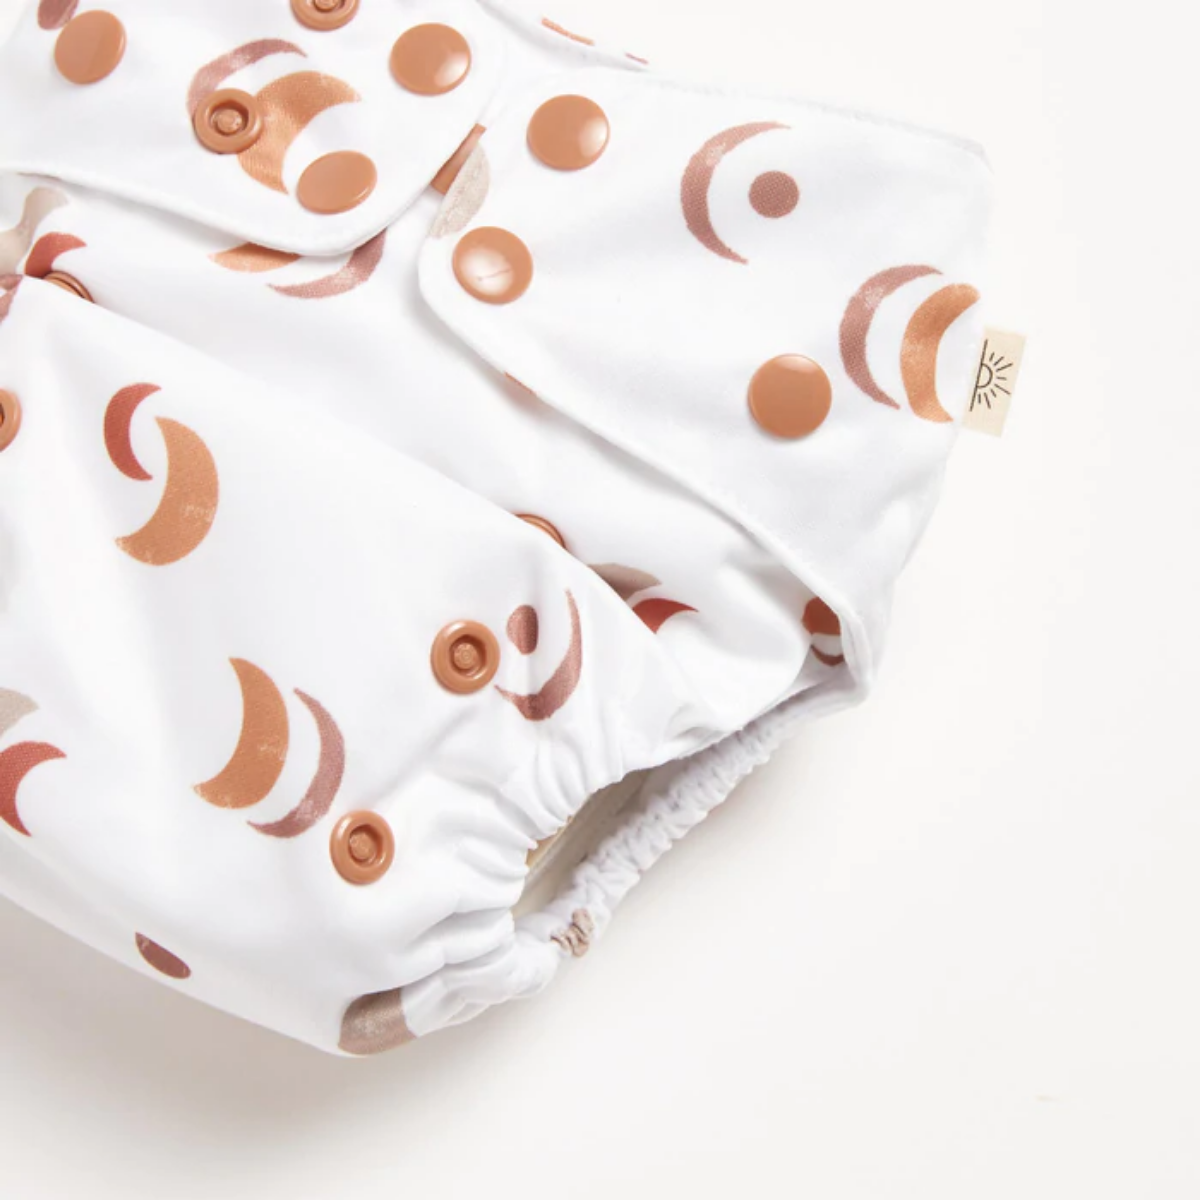 A close up of EcoNaps Desert Moon 2.0 Modern Cloth Nappy on a white surface.